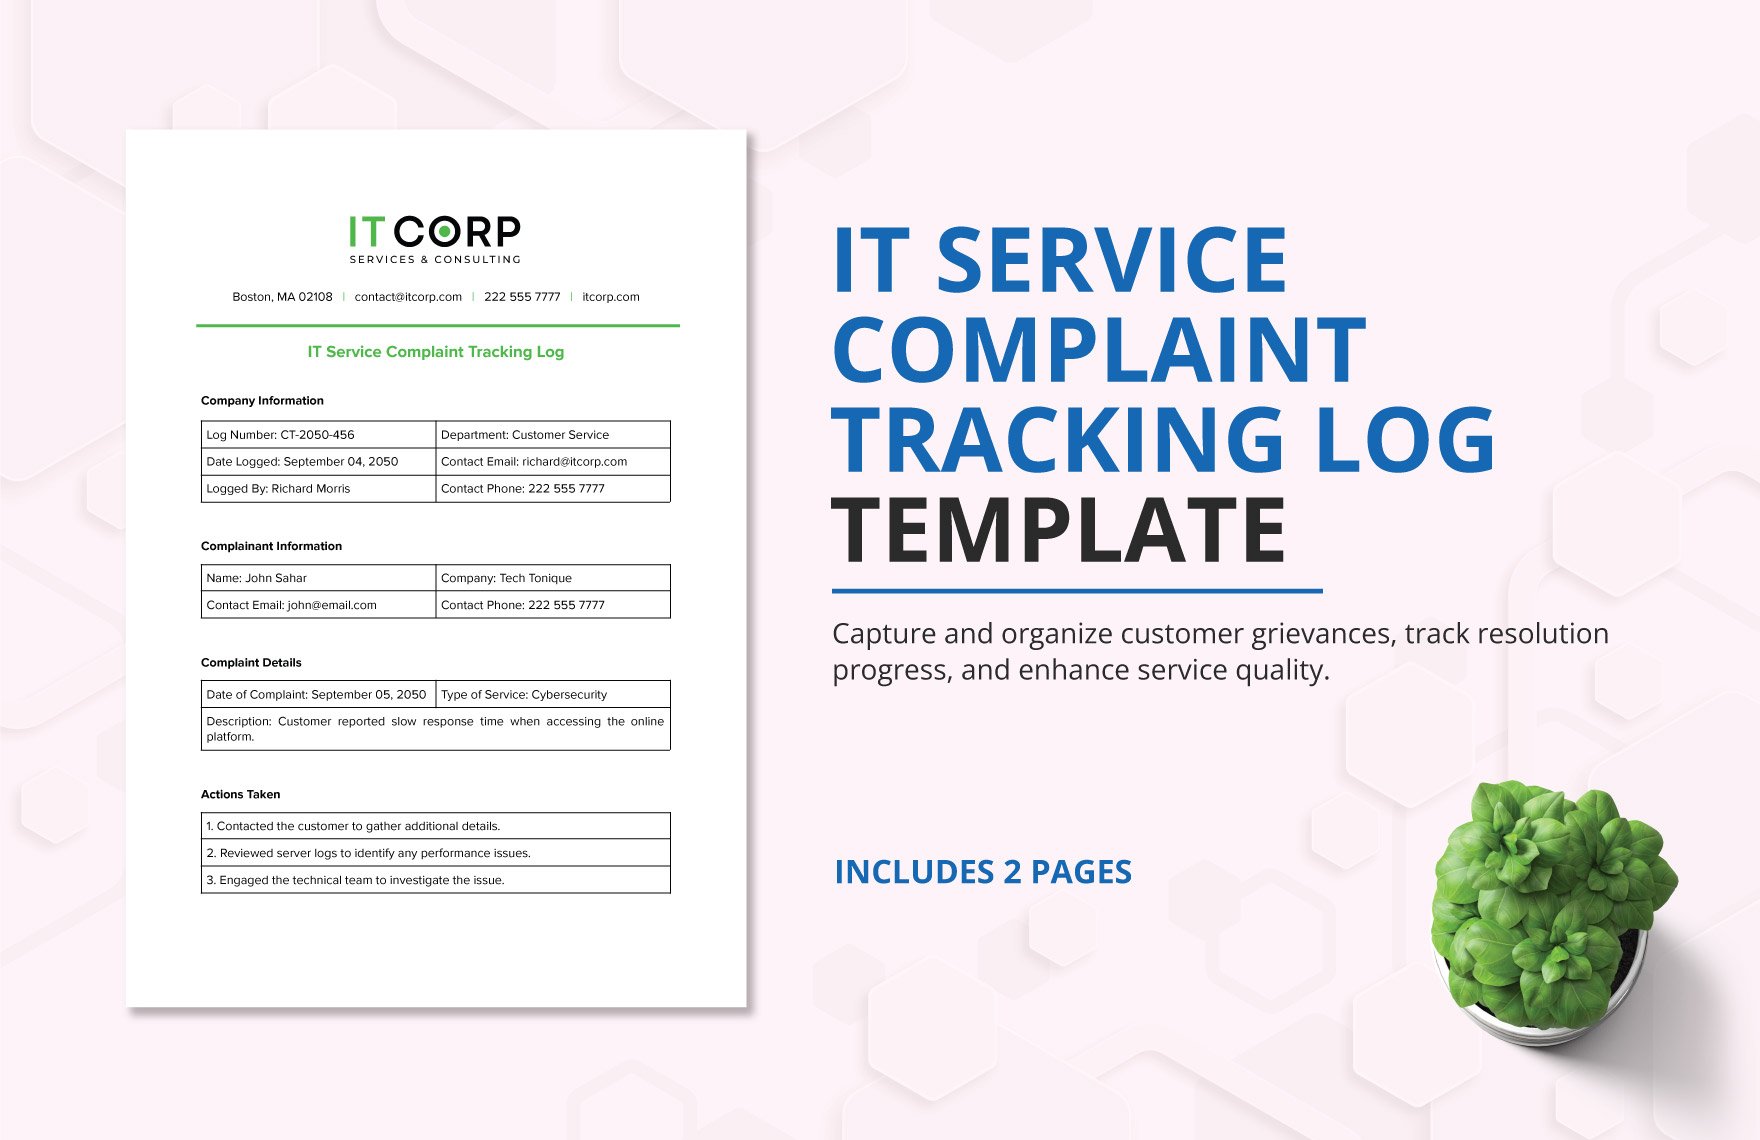 IT Service Complaint Tracking Log Template